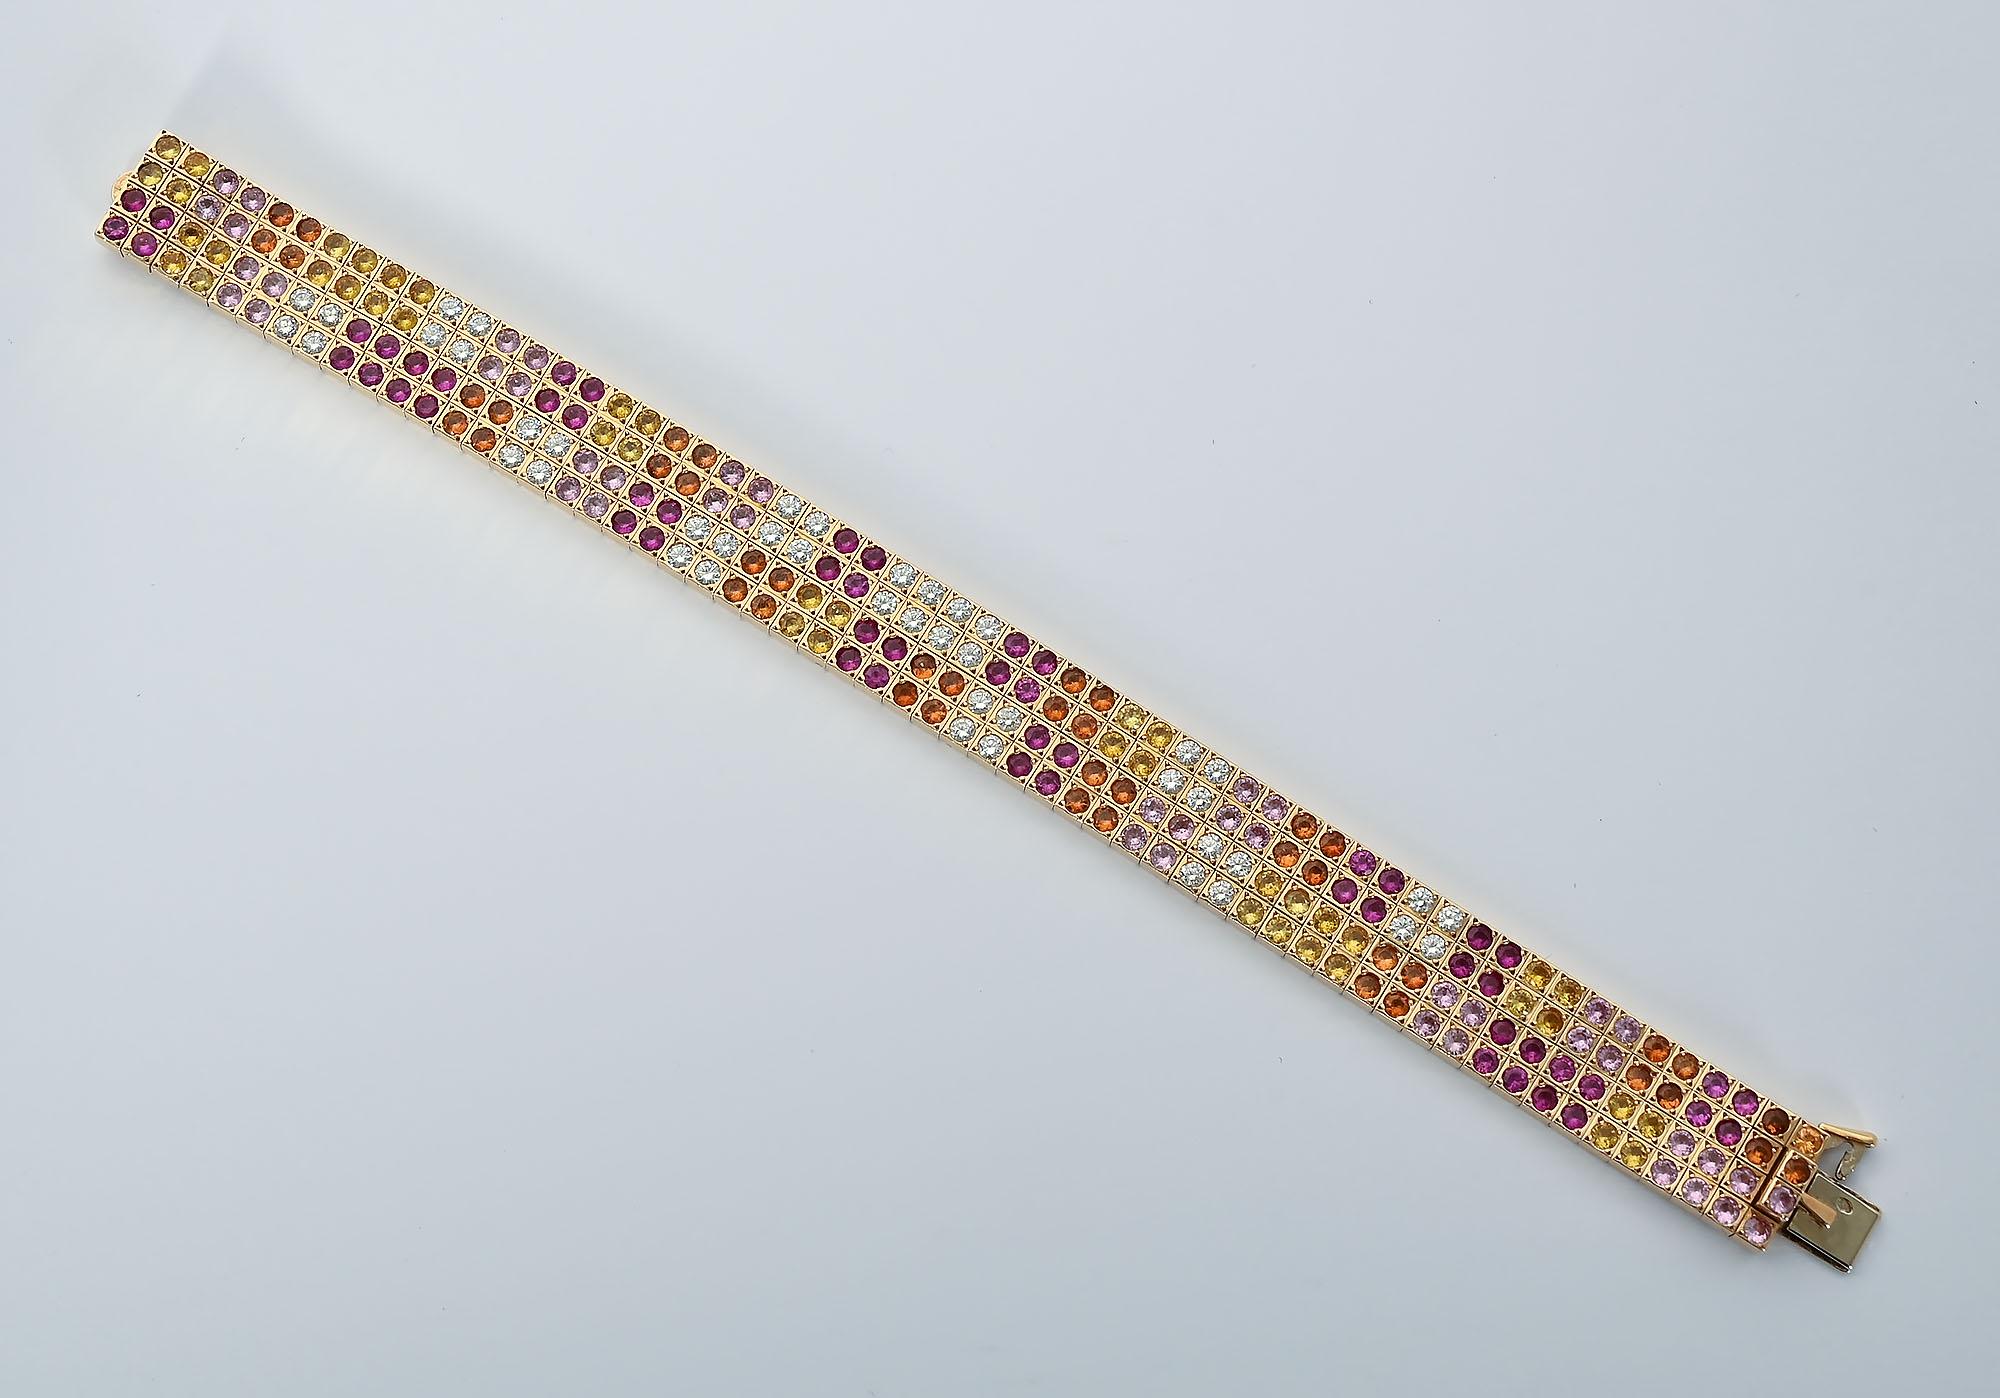 Exquisite Cartier strap bracelet with diamonds and several colors of sapphires. It has 44 diamonds that weigh a total of 3.08 carats. Sapphires colored yellow; marigold and rose weigh a total of 20 carats. The bracelet is made in France. It has the 